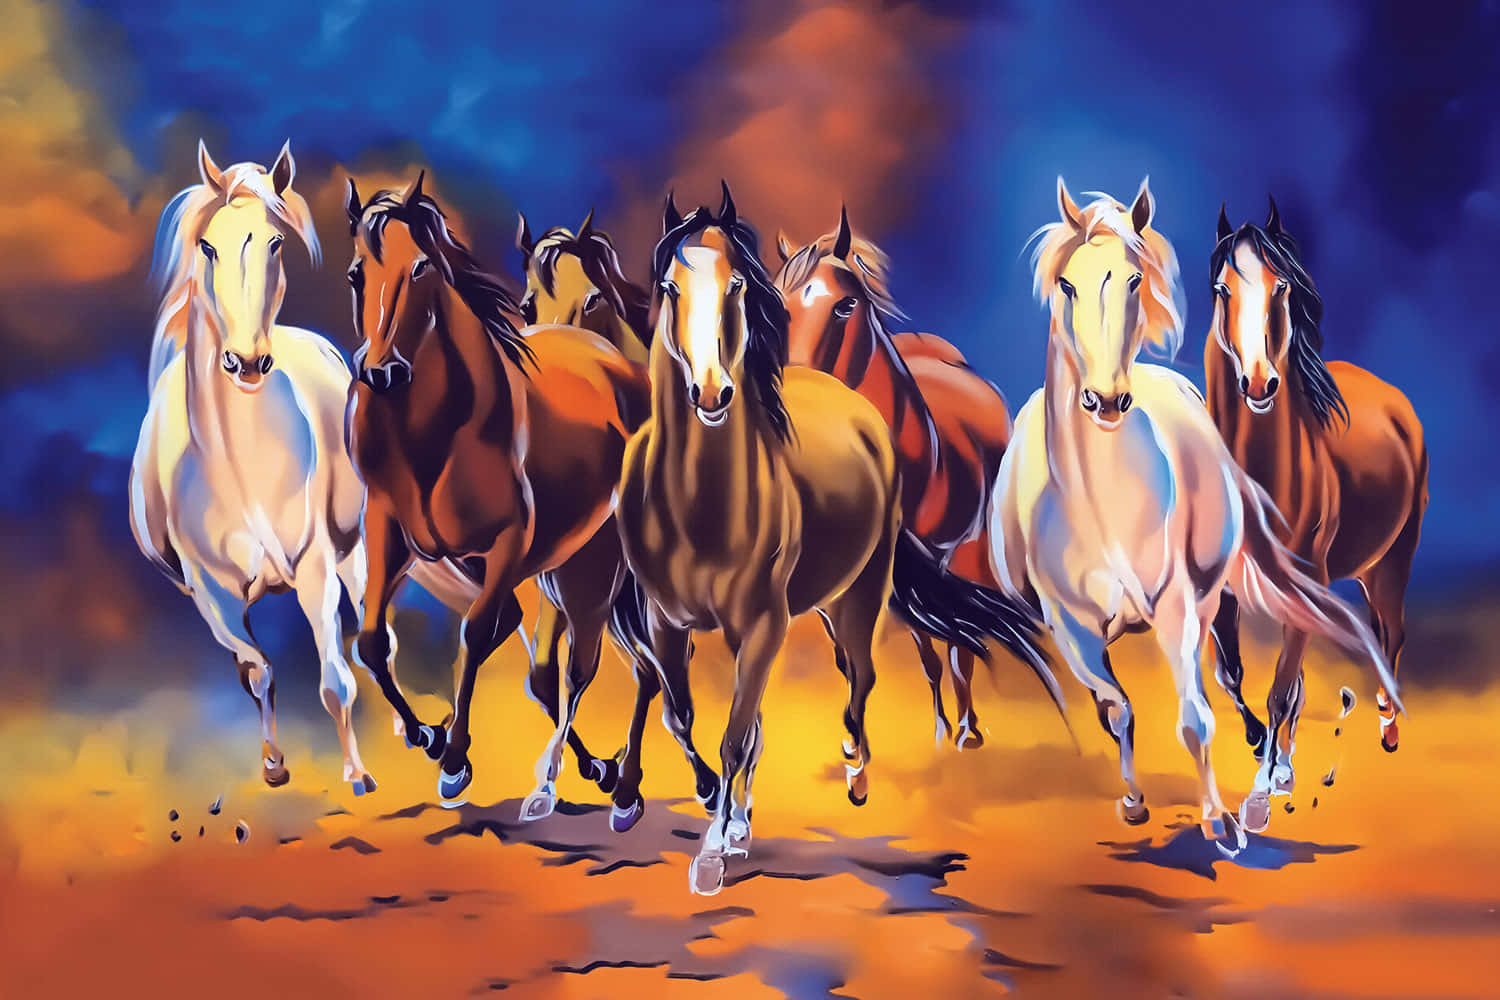 7 Horses With Blue Smoke Wallpaper